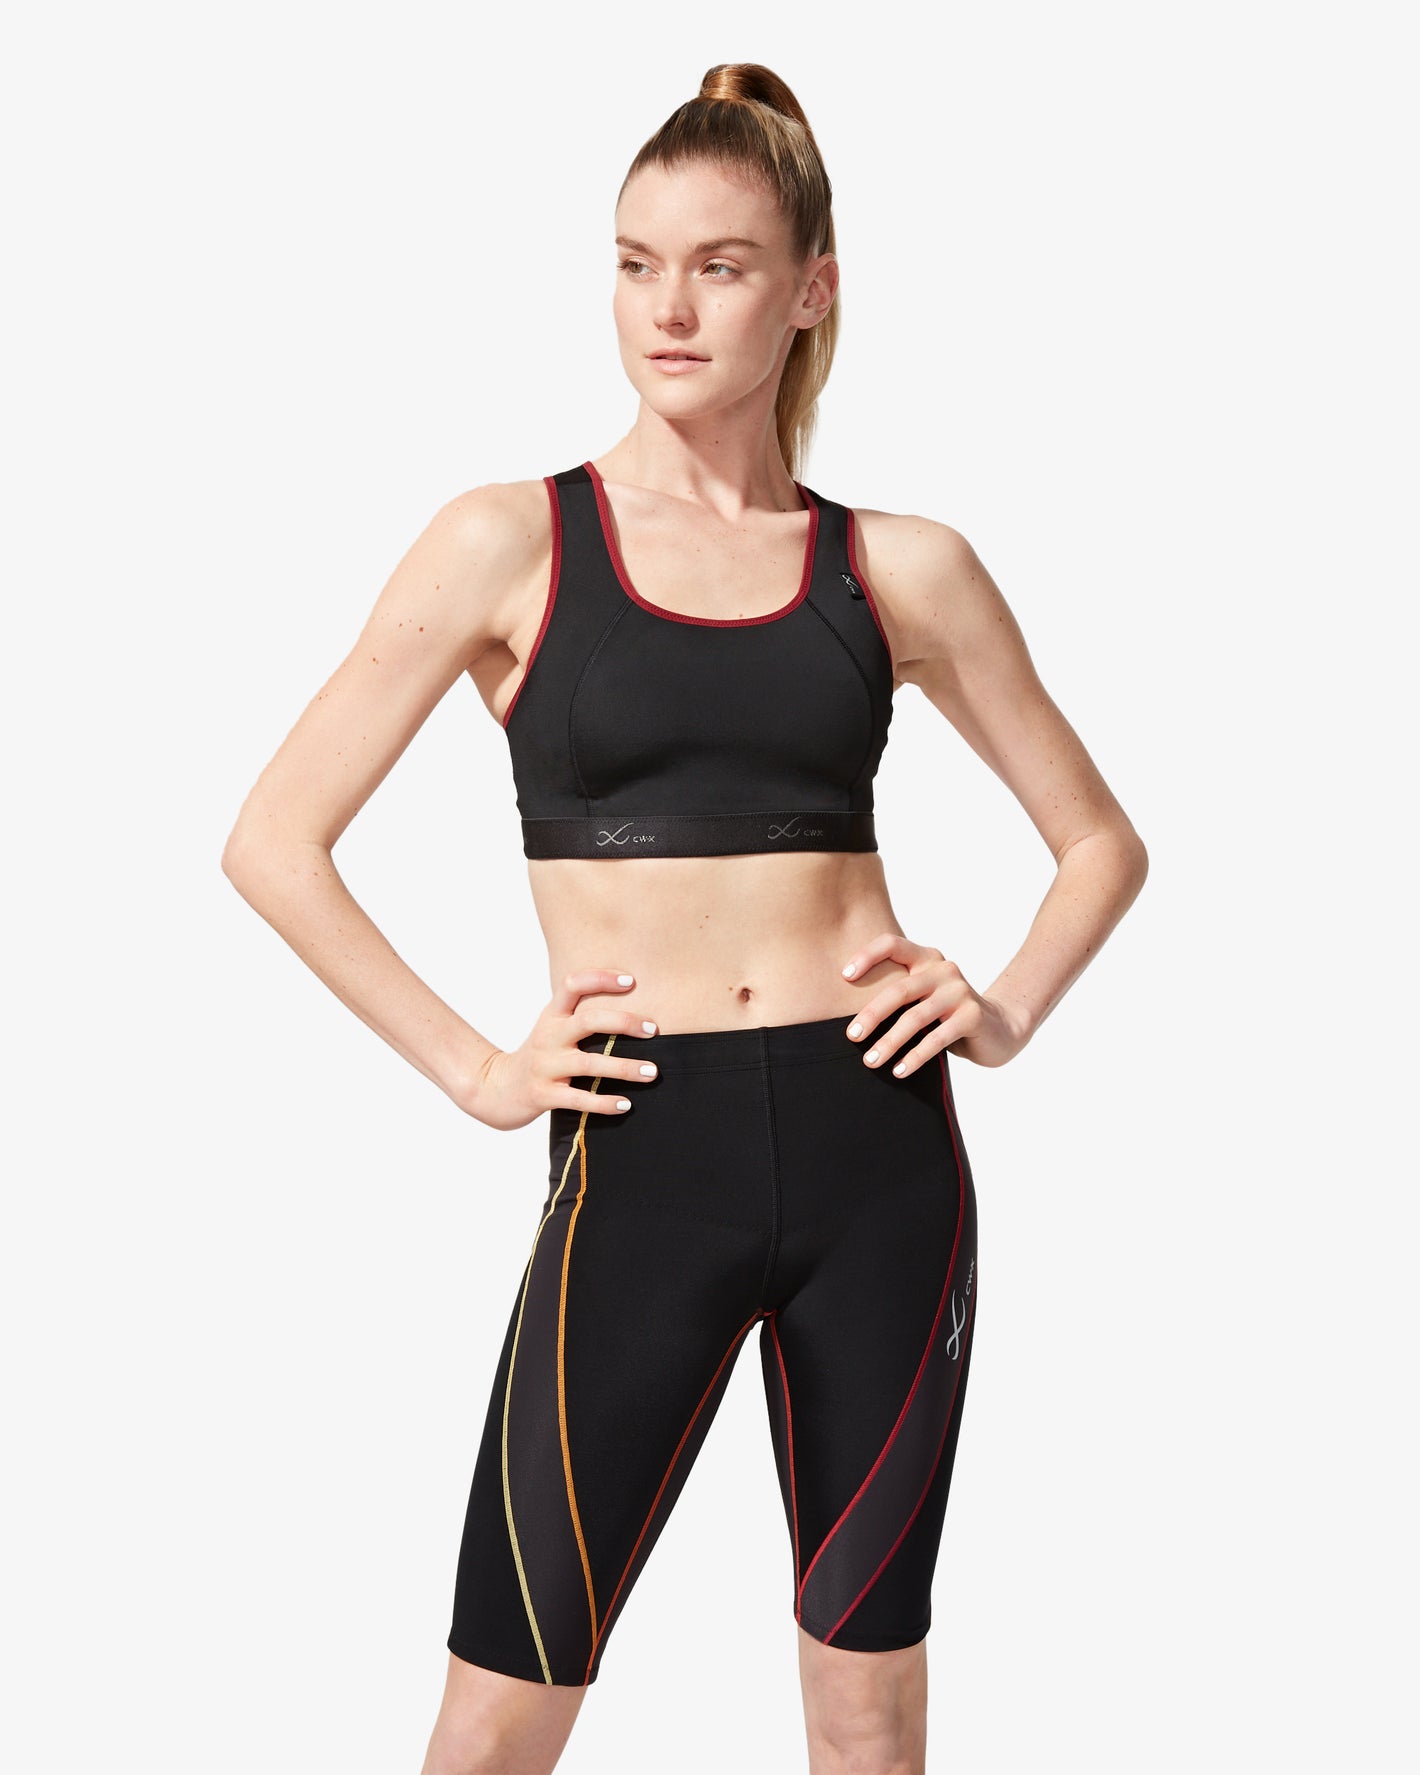 The high-impact sports bra to 𝗥𝗶𝘃𝗮𝗹 all others 🫨. Features